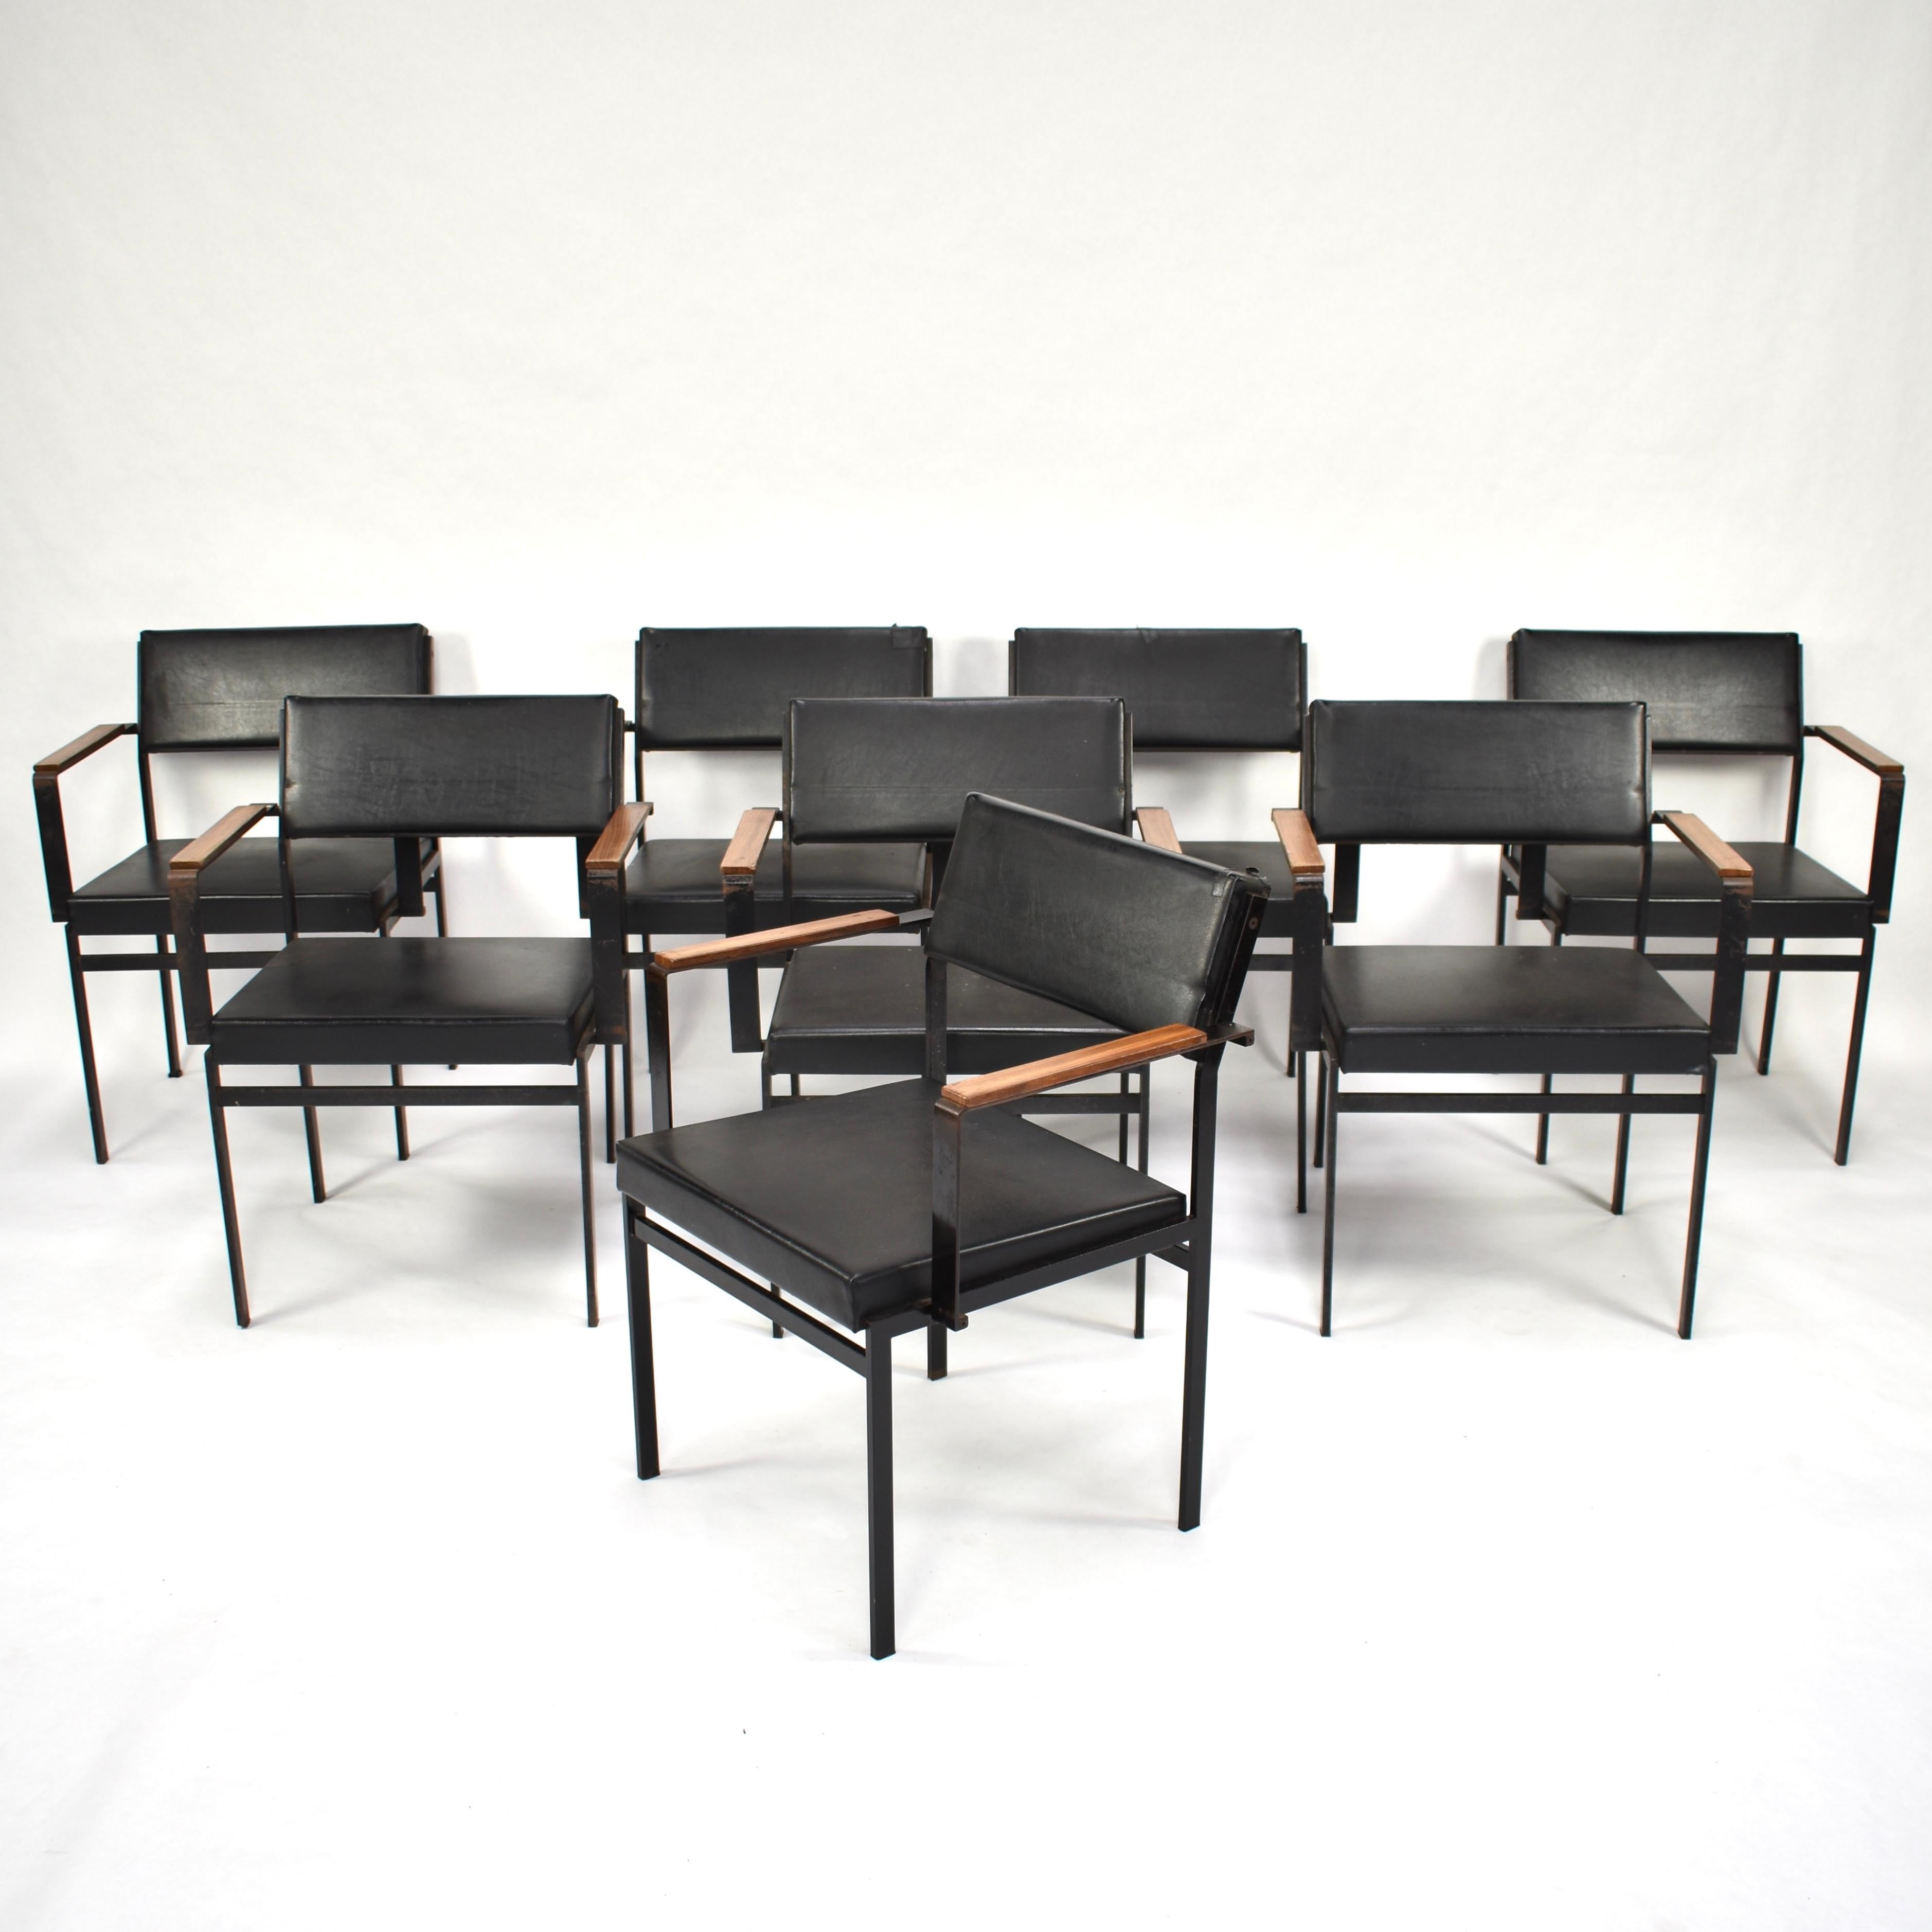 Model FM17 Japanese series dining chairs by Cees Braakman for Pastoe, 1950s.

Designer: Cees Braakman

Manufacturer: Pastoe

Country: The Netherlands

Model: FM17 Dining chair

Material: Black lacquered metal / black faux leather / solid